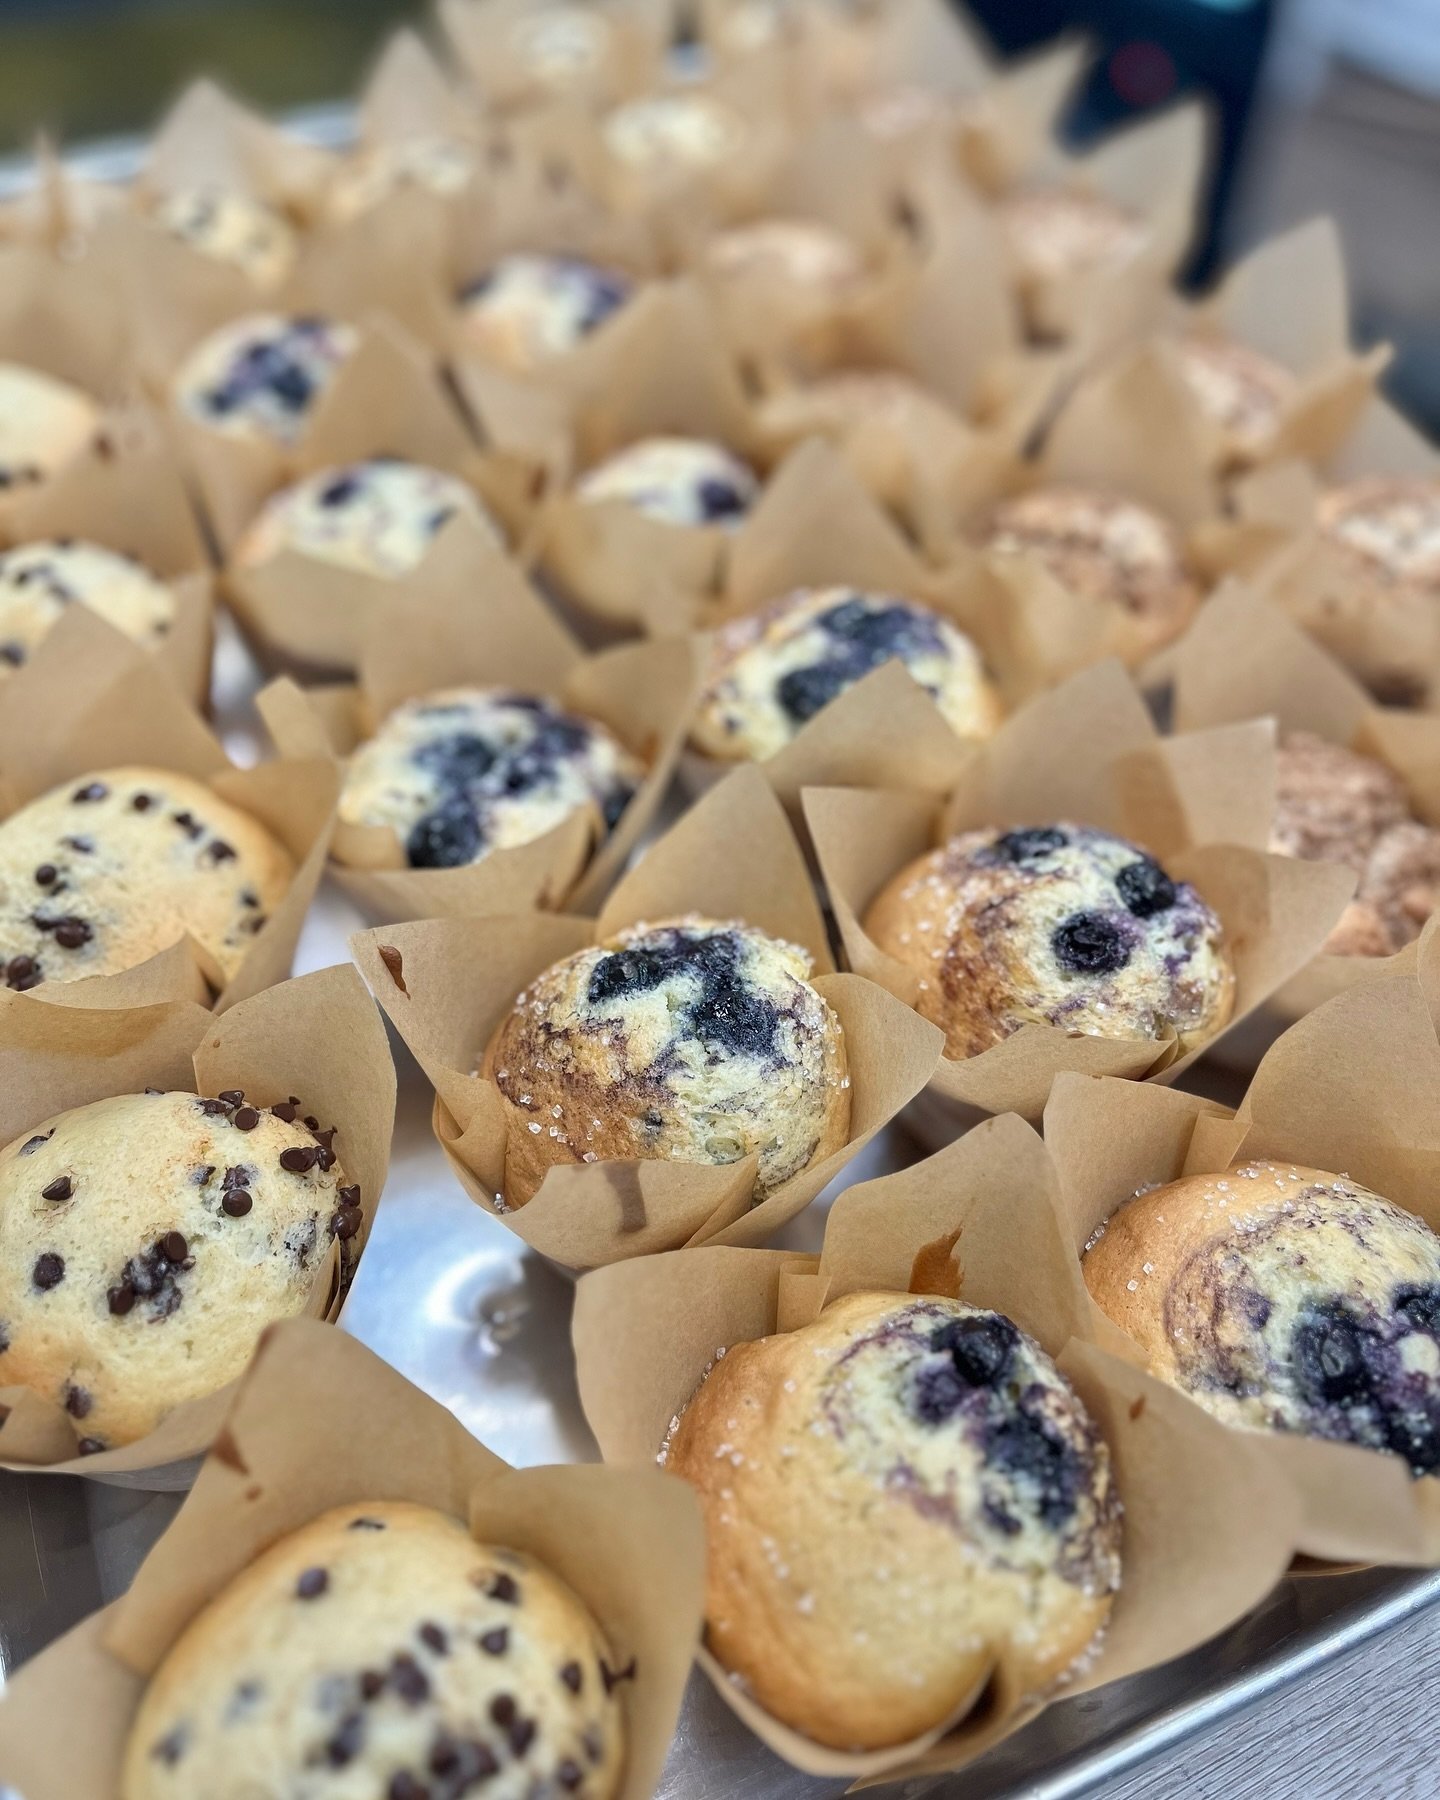 Do you know the muffin man?🫐

We are stocked with blueberry, cinnamon streusel and chocolate chip muffins this week